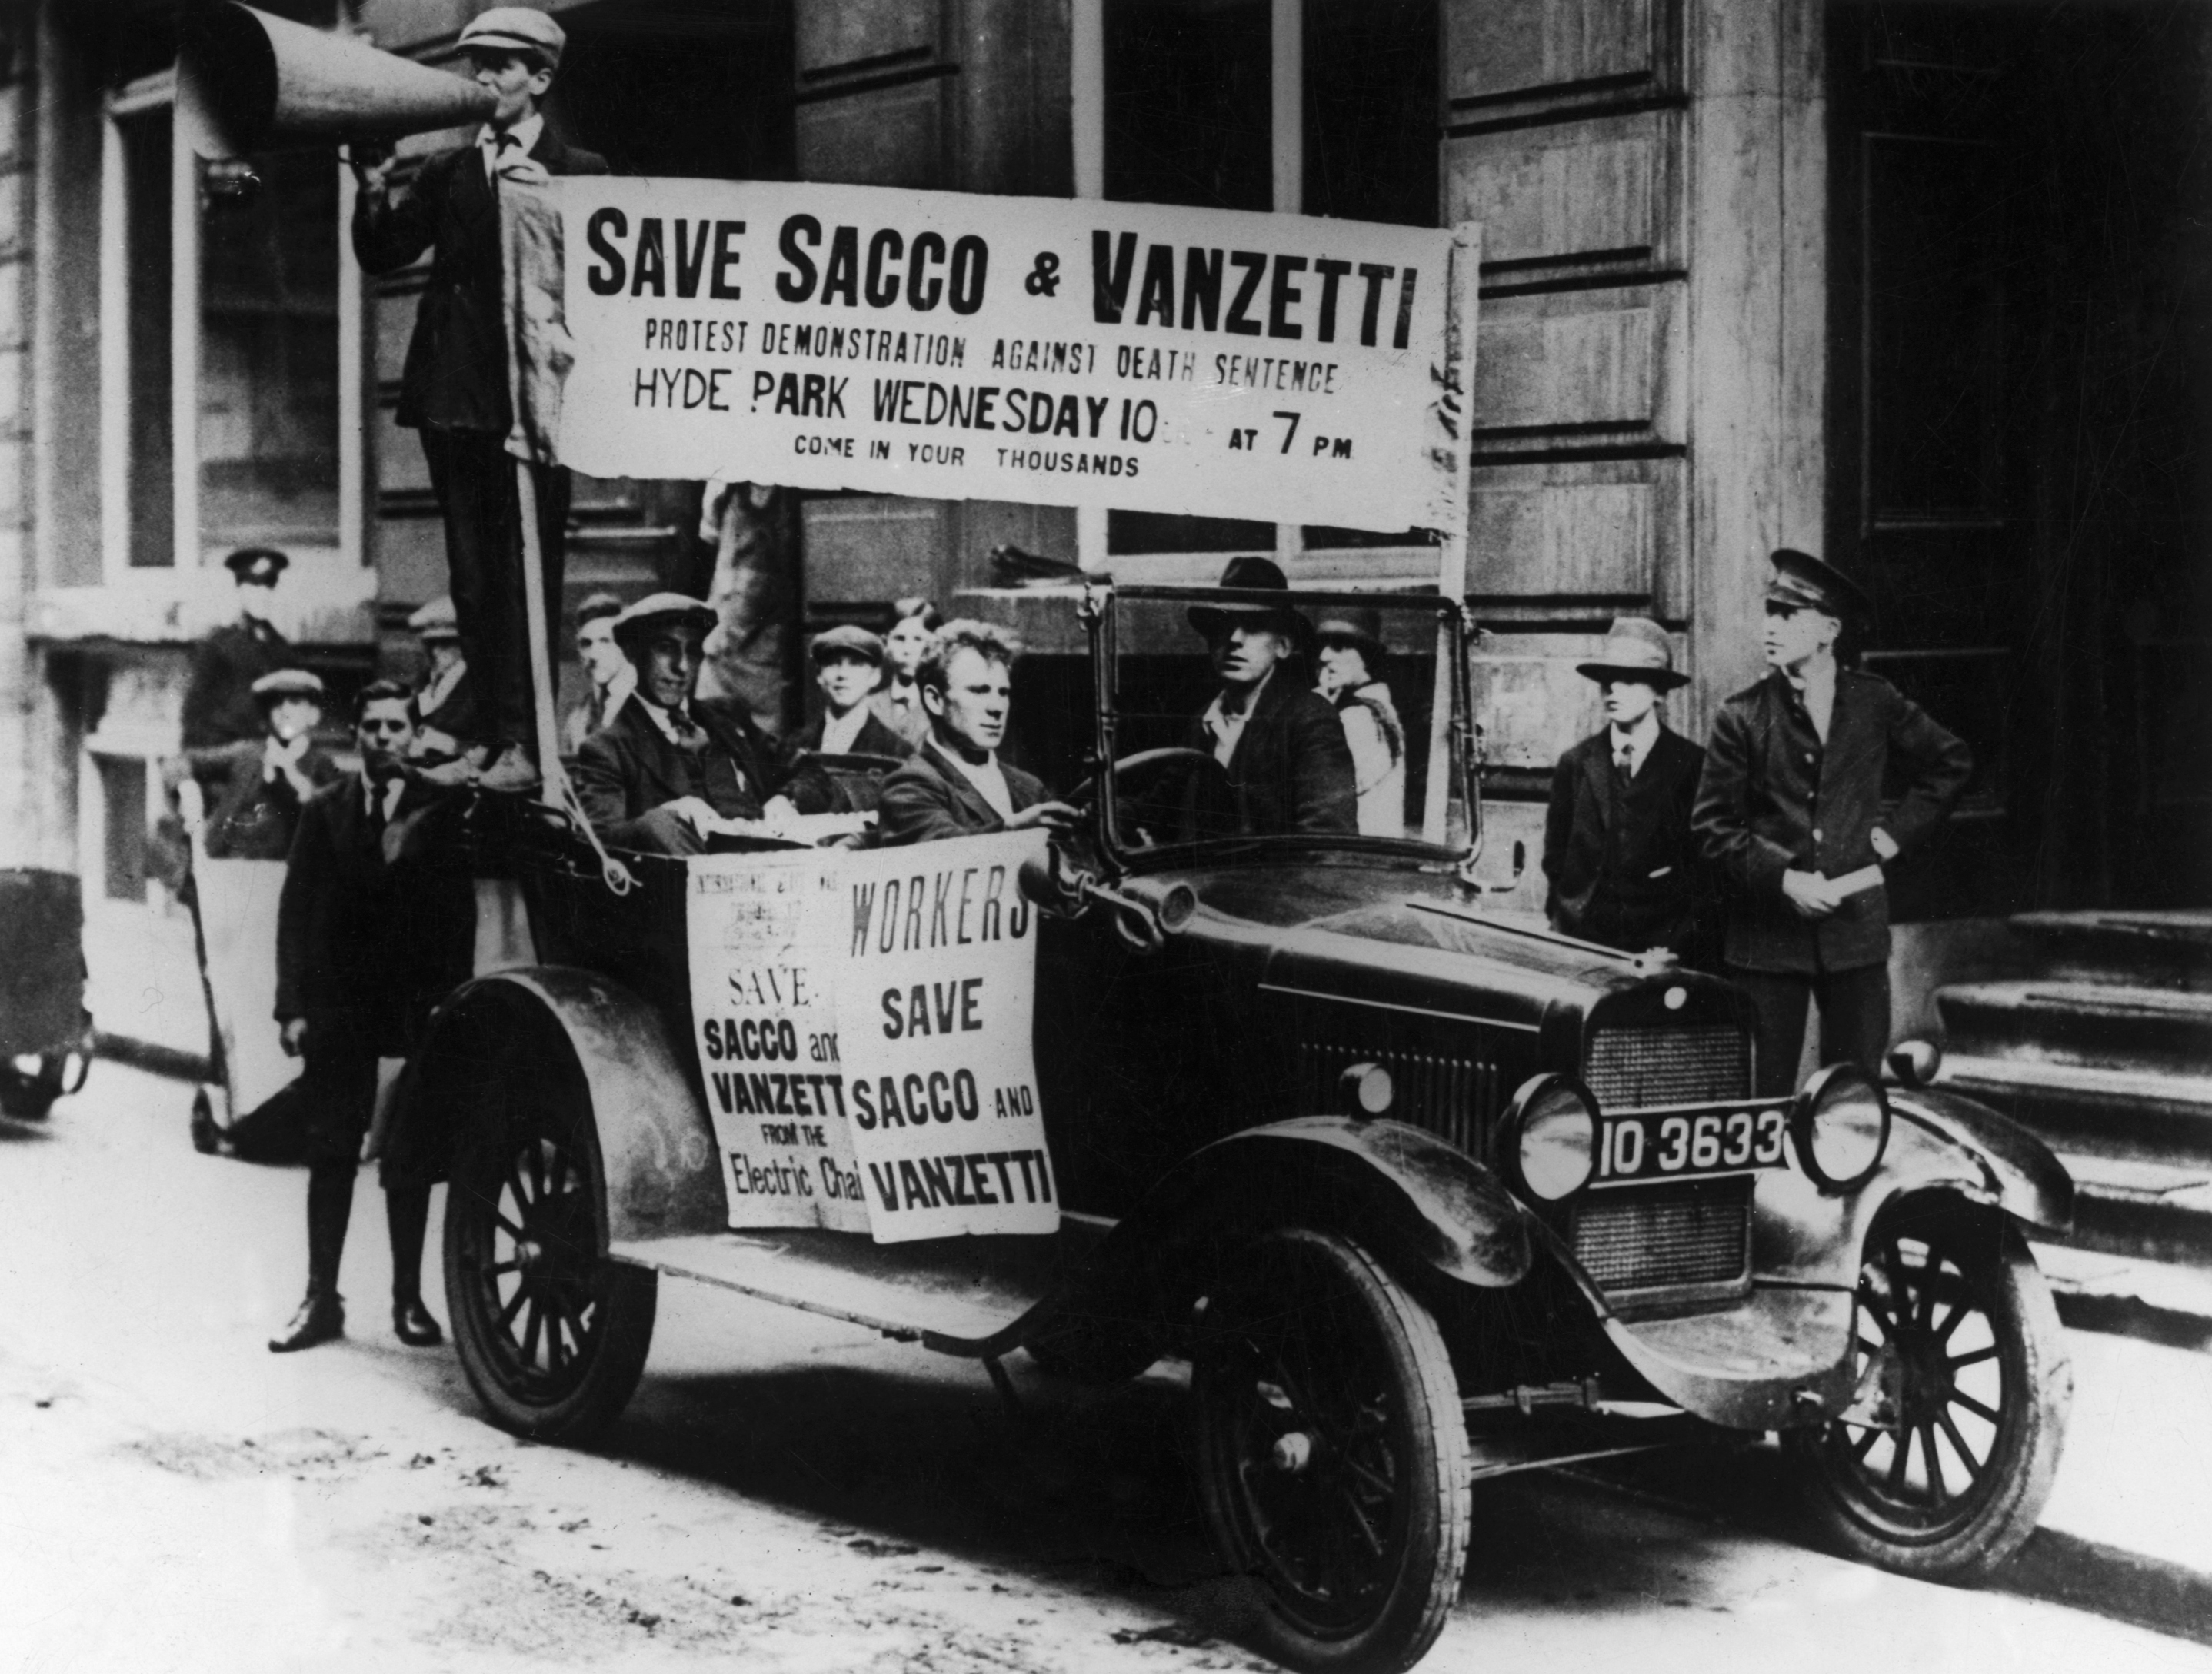 Protesters canvass London for a mass rally to be held in Hyde Park against the death sentence leveled against Sacco and Vanzetti in America. When Lippmann wrote about the two Italian immigrant anarchists—who were executed for murdering two men despite another man’s confession that he committed the crime— he focused on those who decided their fate, rather than on Sacco and Vanzetti